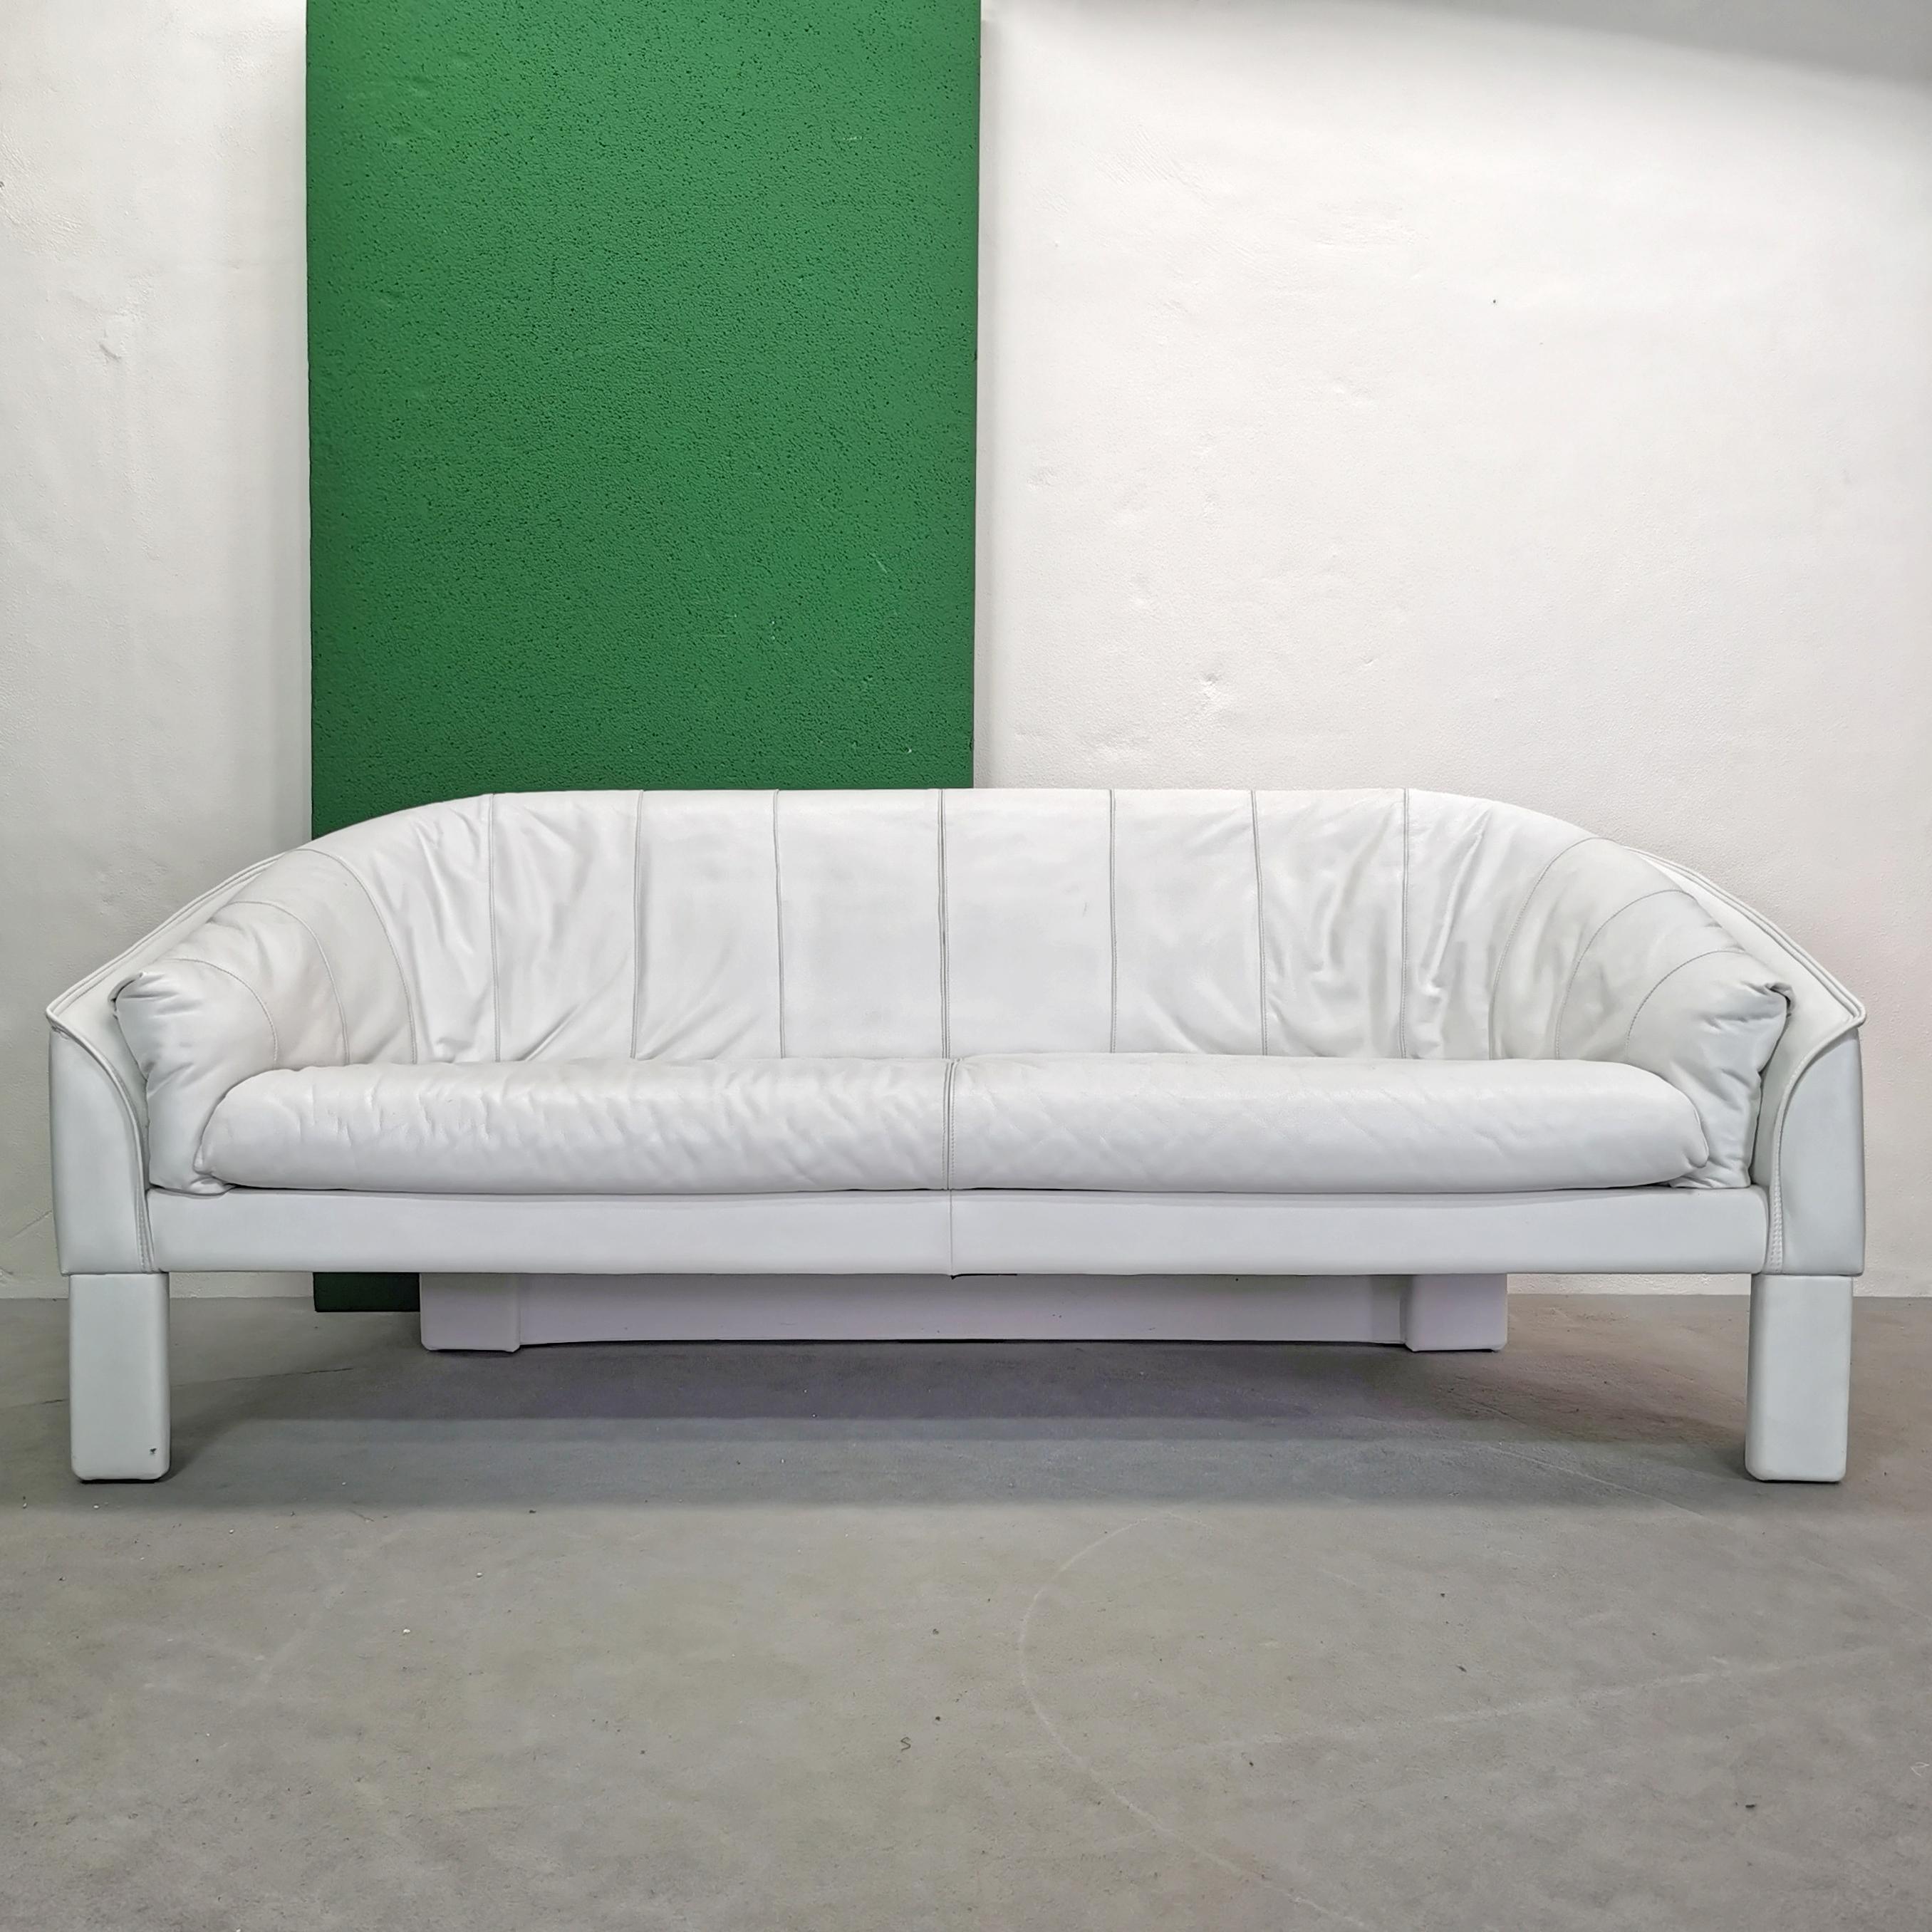 This leather sofa is a testament to 1980s style.
the shape of the semi-circle back makes it particularly elegant and distinctive from other models featured.
The Marac manufacturing brand is synonymous with the highest quality that has been